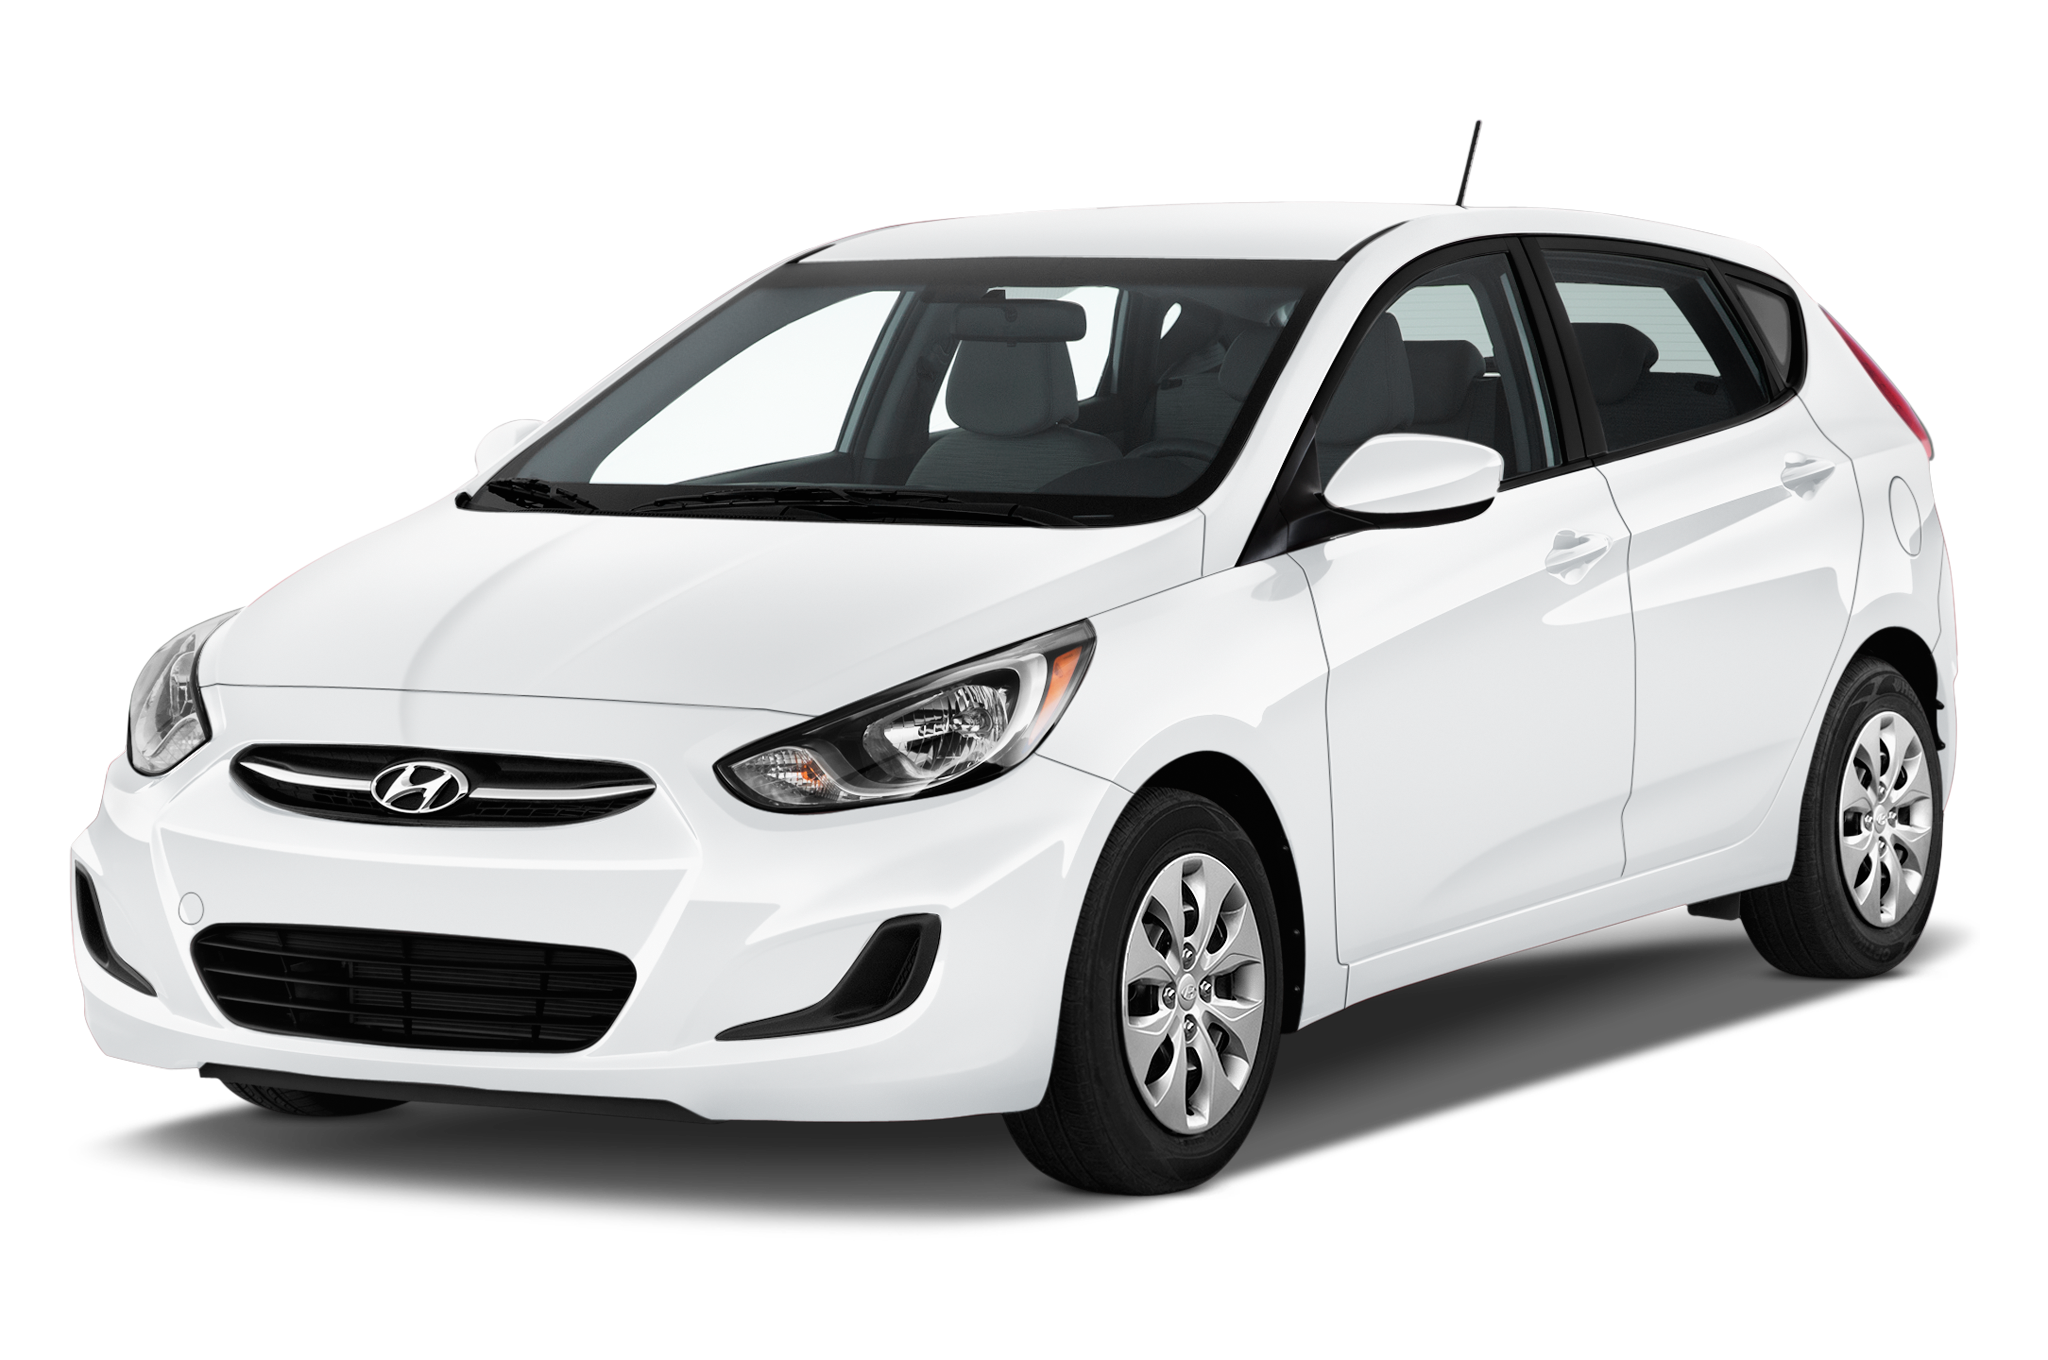 2017 Hyundai Accent Hatchback GL 6MT Features and equipment - MSN Autos